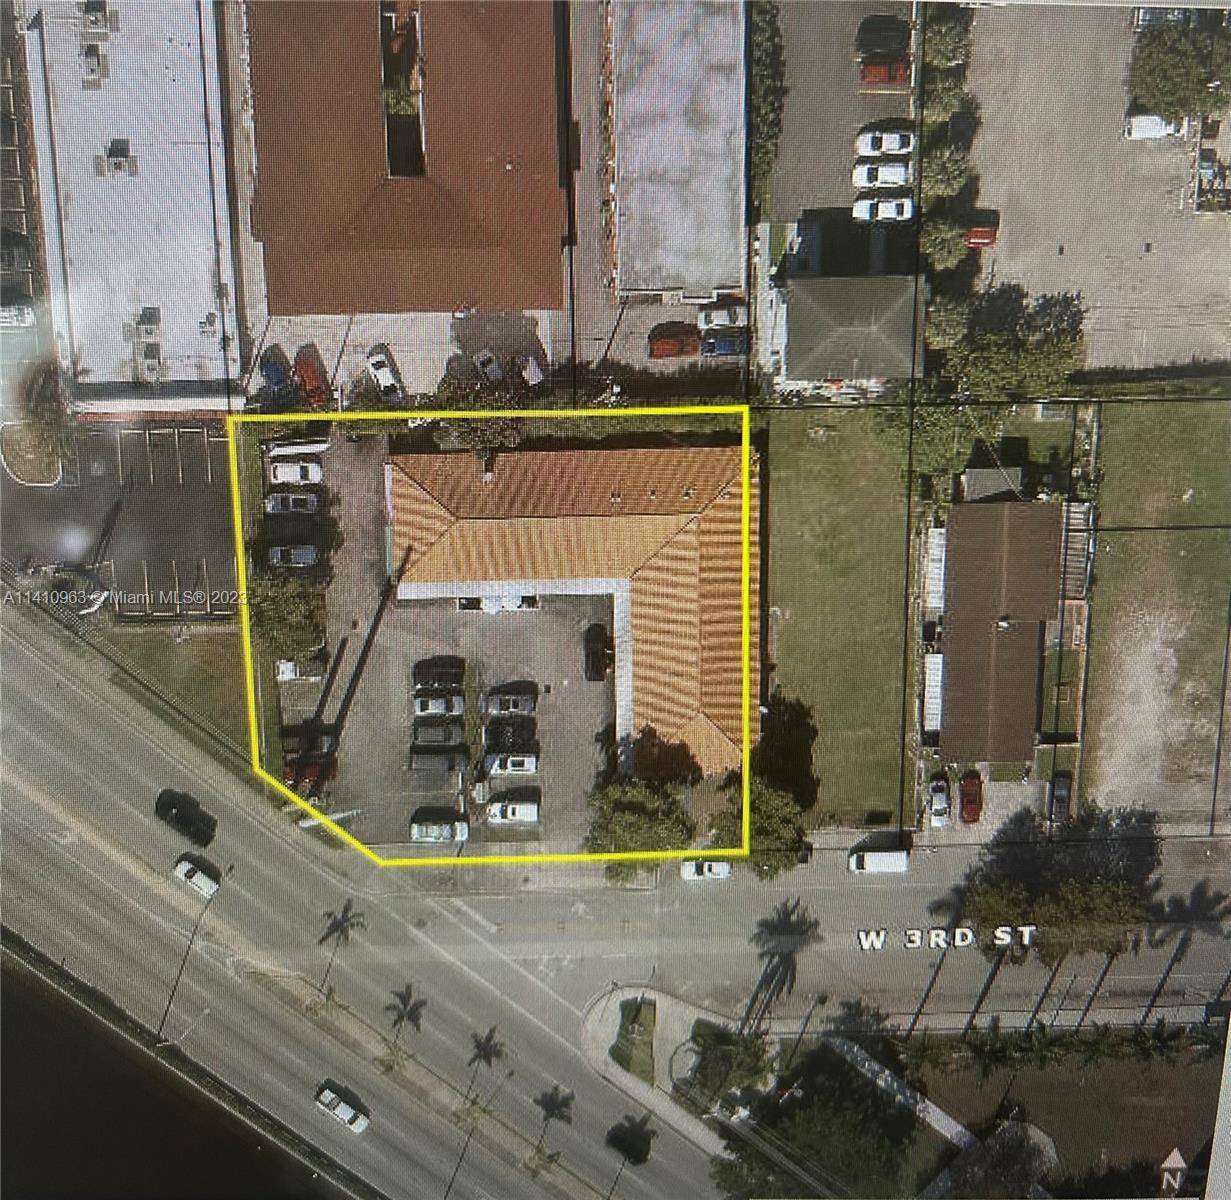 GREAT PROPERTY FOR INVESTORS DEVELOPERS Nice established shopping center in Hialeah sitting on a large corner 20196 sq ft lot on highly trafficked State Road, W Okeechobee Rd SR 2 ...